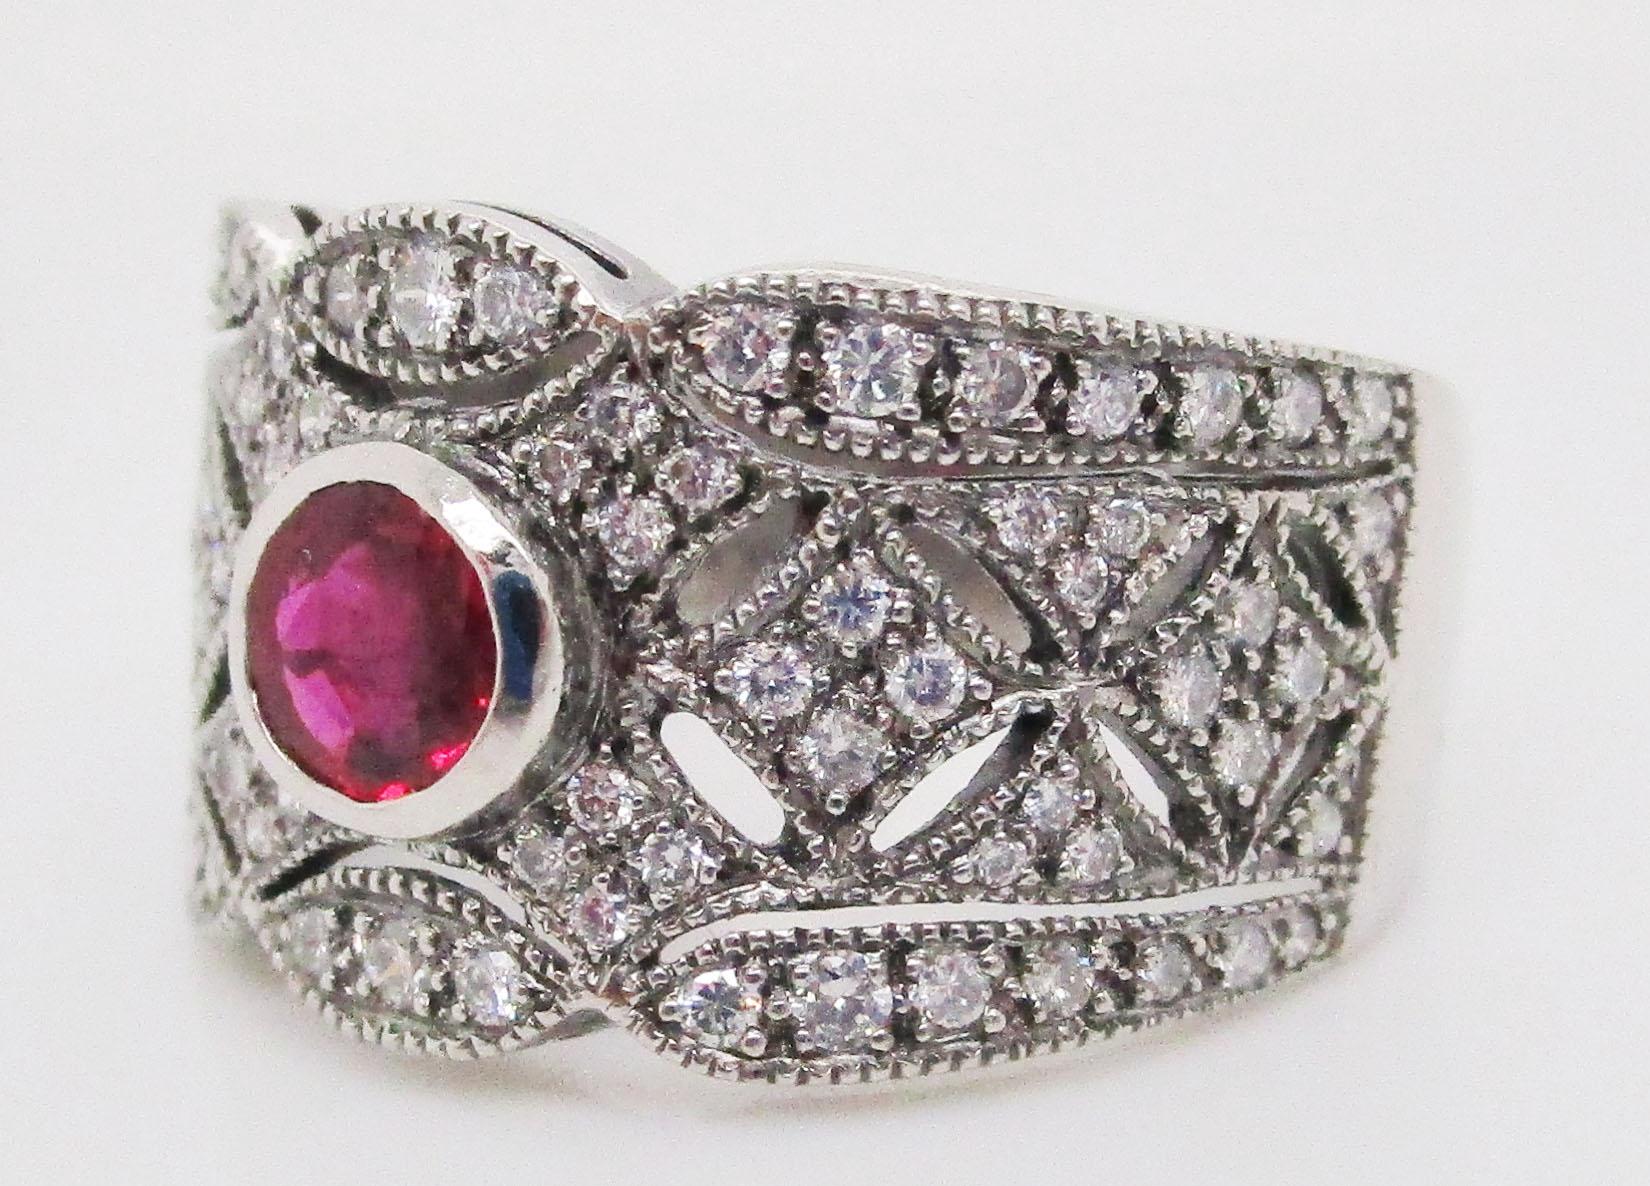 This absolutely stunning Art Deco Style band features gorgeous platinum filigree set with diamonds and boasting a rich red natural colored ruby center! The deep red hues of the natural colored ruby are nothing less than striking when set against the